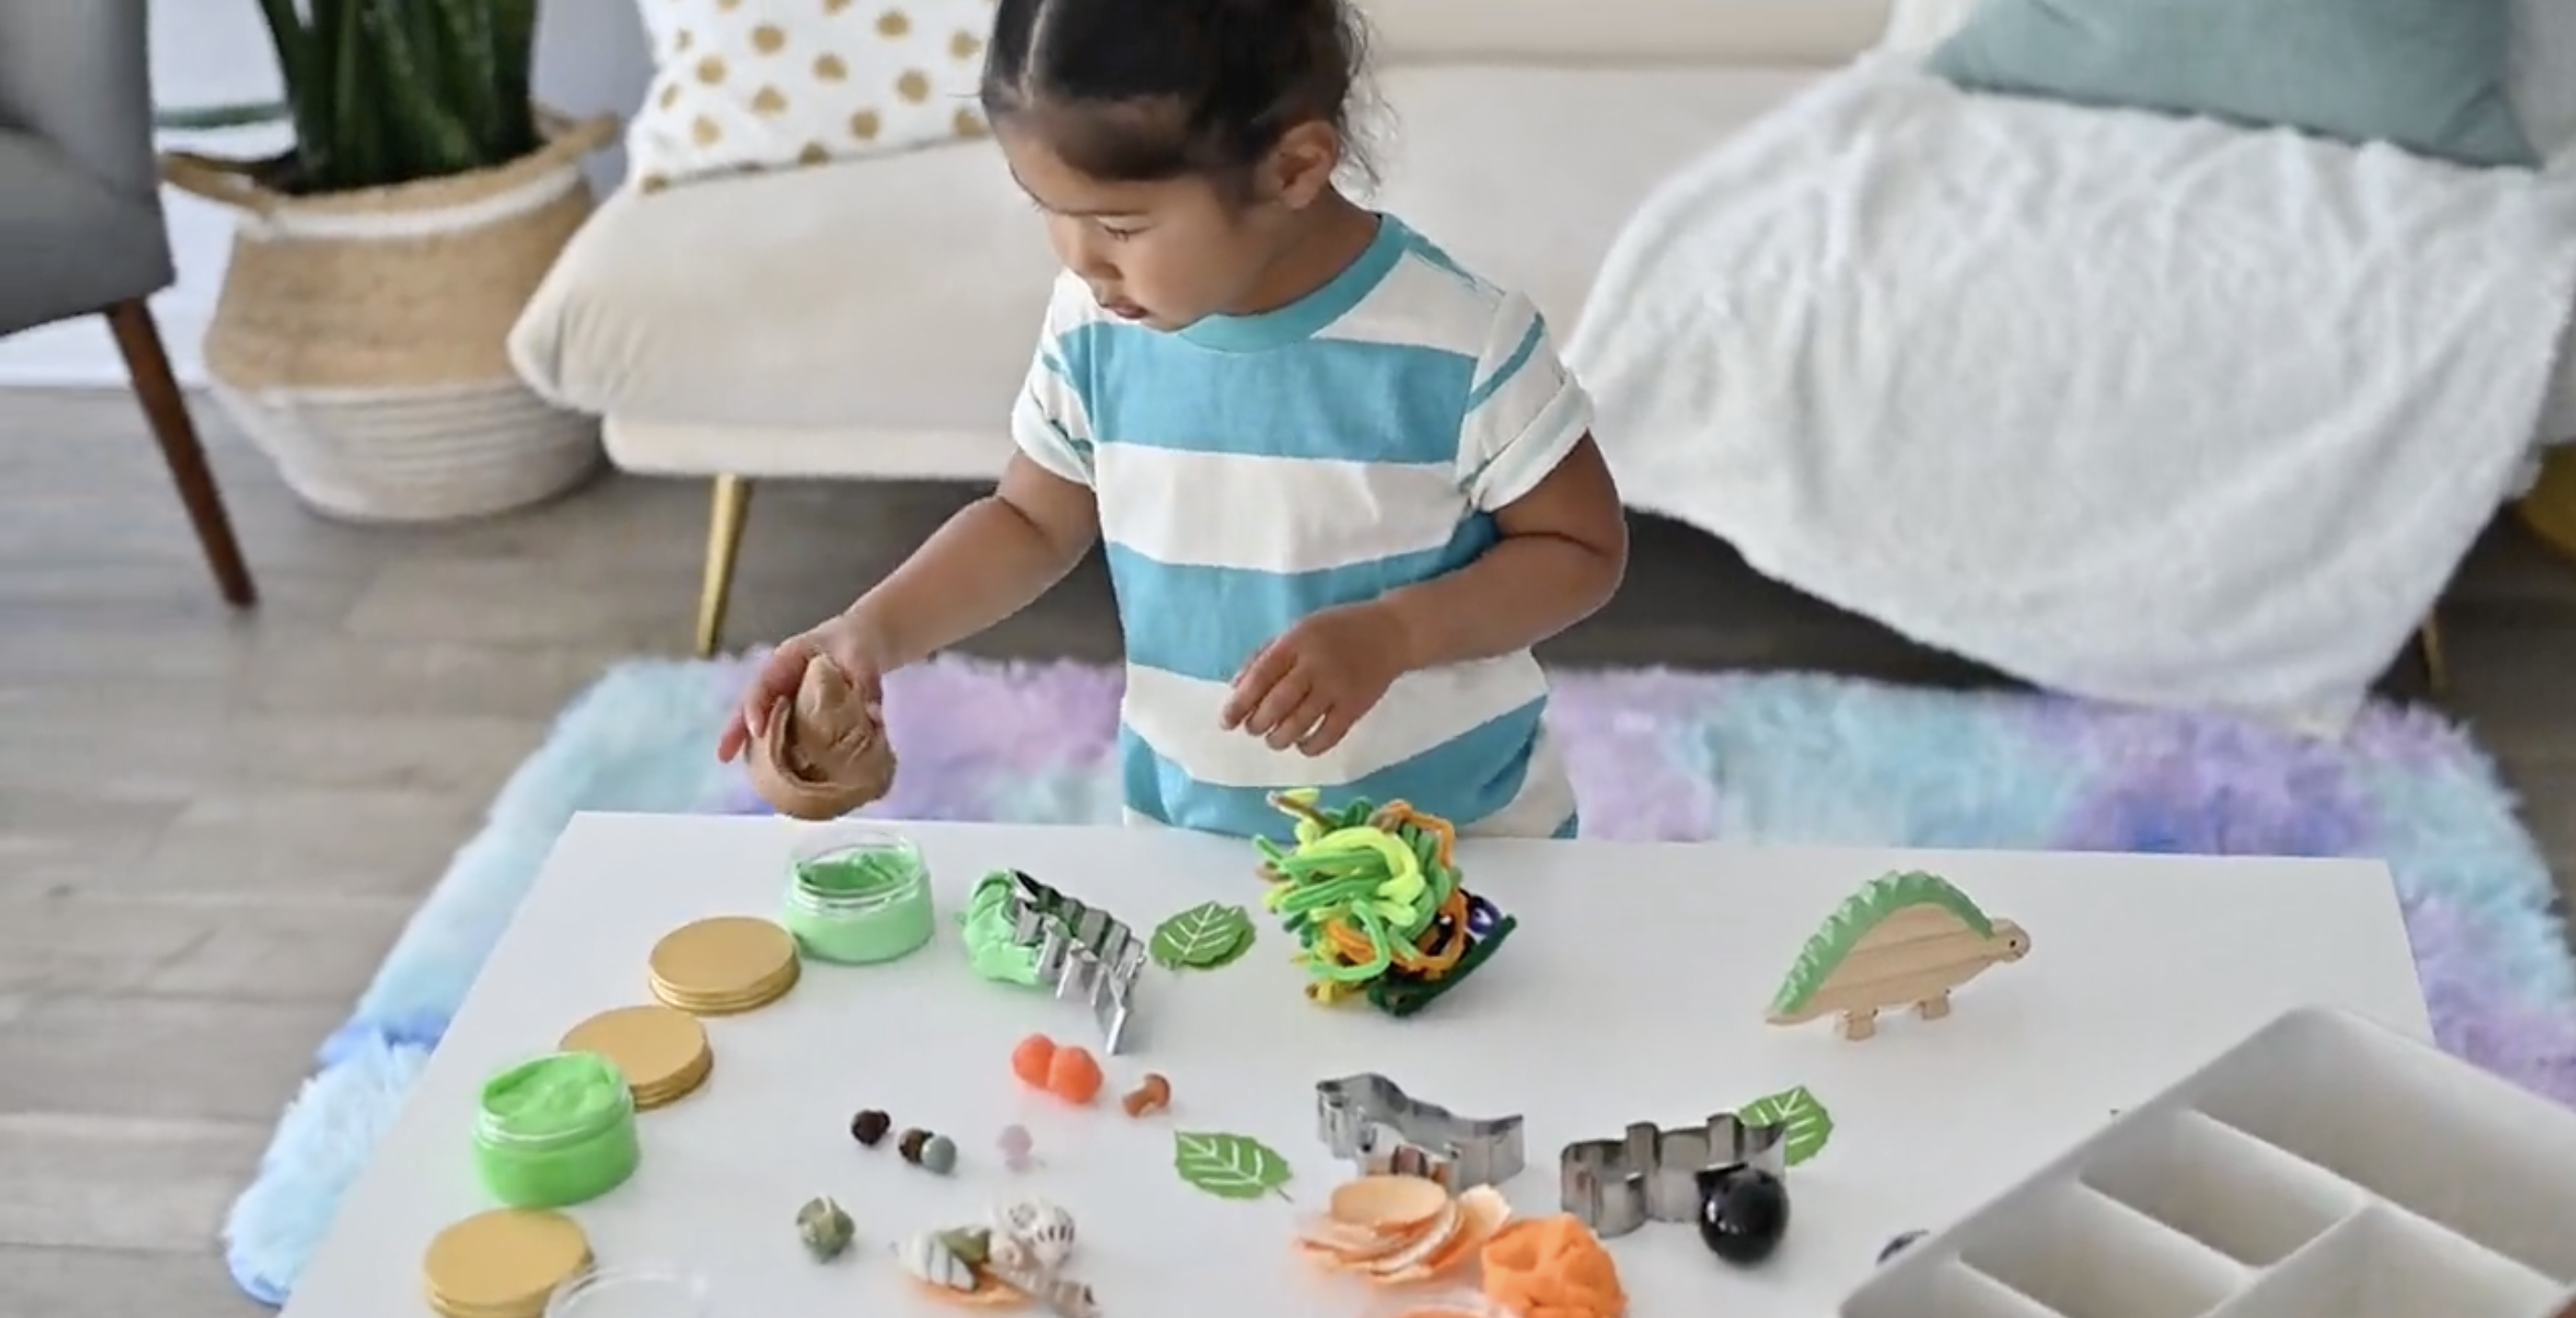 How to Get Started with Sensory Play